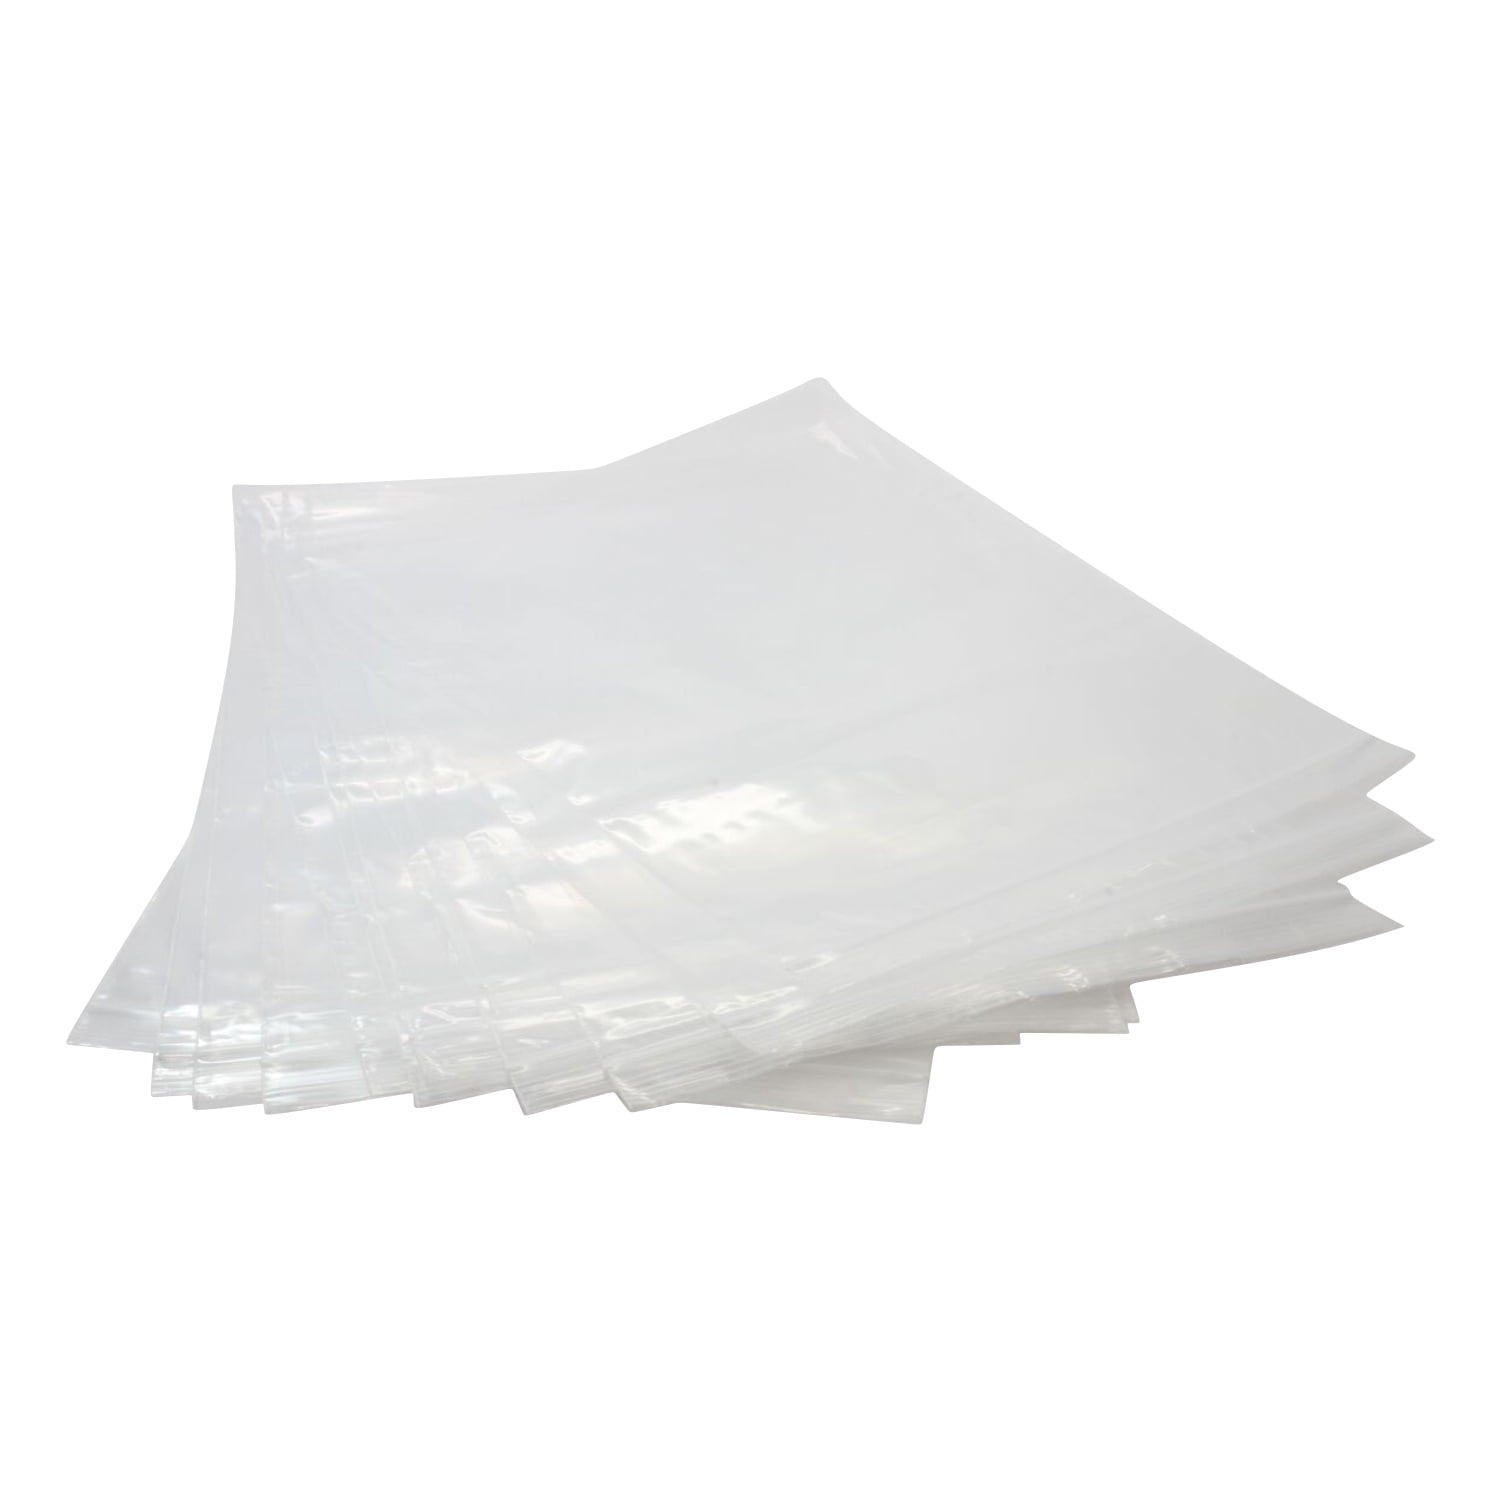 LARGE XL GRIP SEAL RESEALABLE PLASTIC BAGS 13 x 18" CLEAR *MULTI ITEM LISTING* 